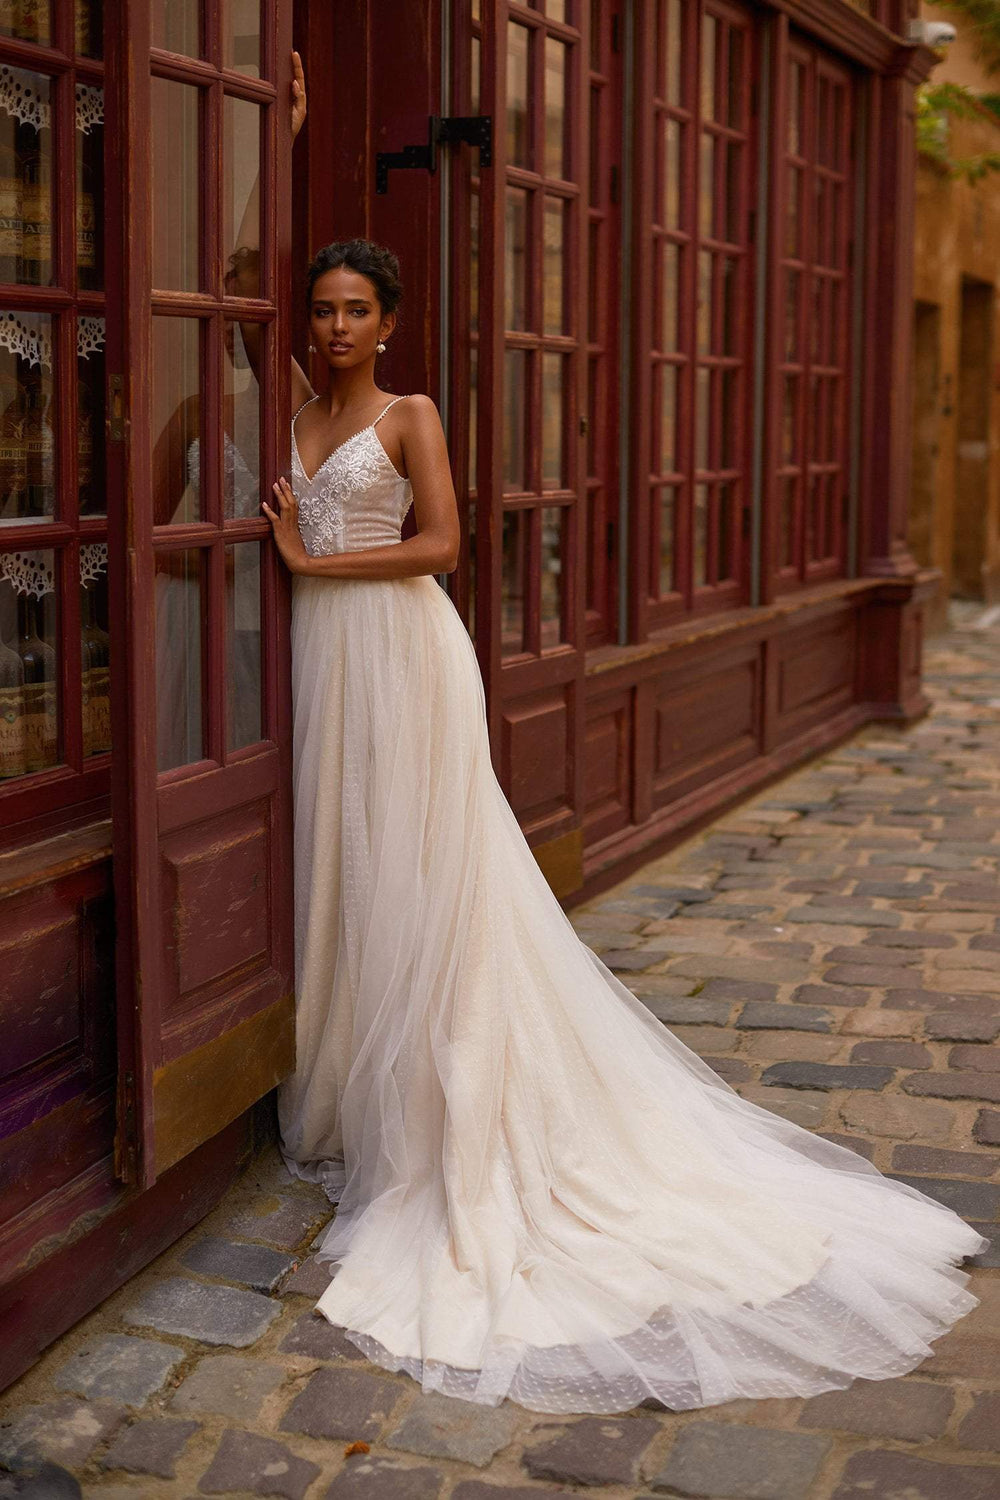 A&N Carys - White & Nude Textured Tulle Boho Bridal Gown With Pearls